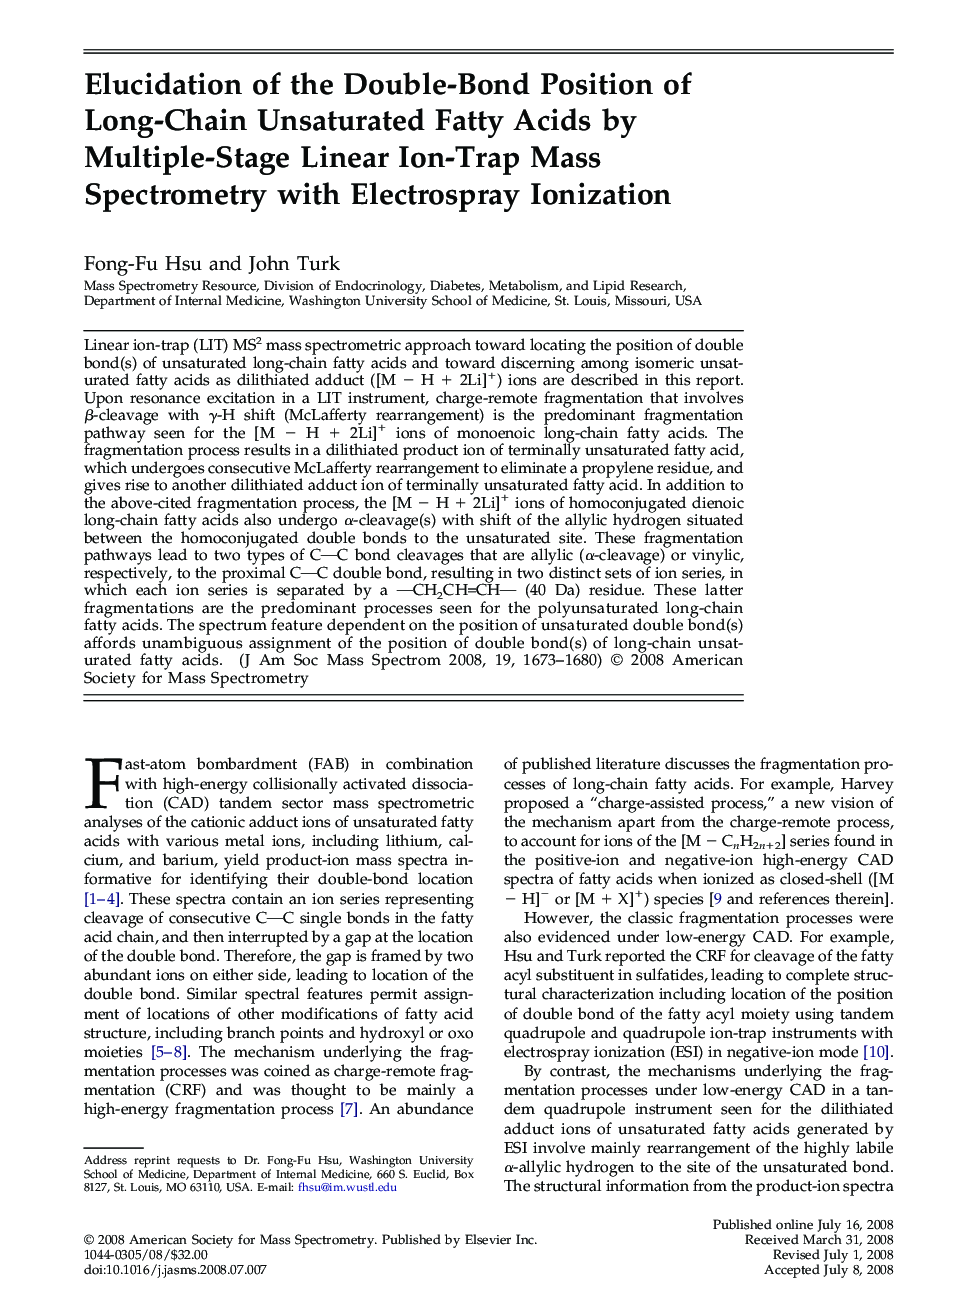 Elucidation of the Double-Bond Position of Long-Chain Unsaturated Fatty Acids by Multiple-Stage Linear Ion-Trap Mass Spectrometry with Electrospray Ionization 